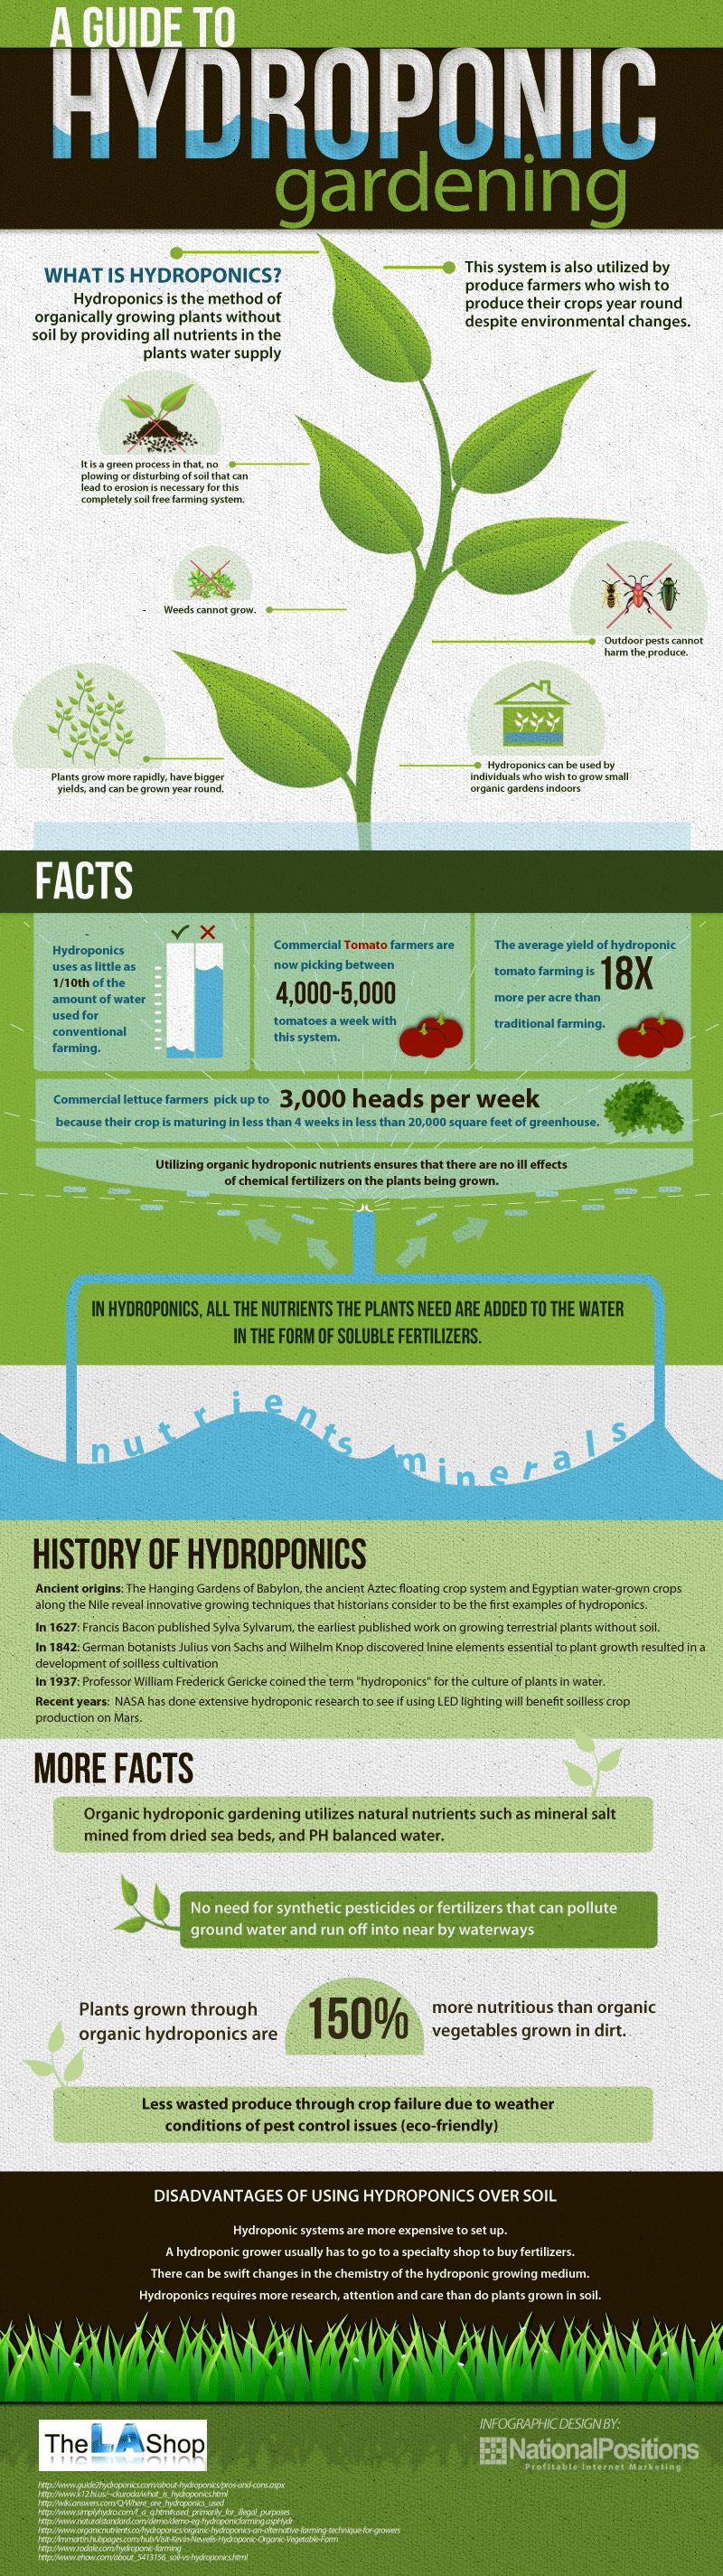 Pros and Cons of hydroponic farming